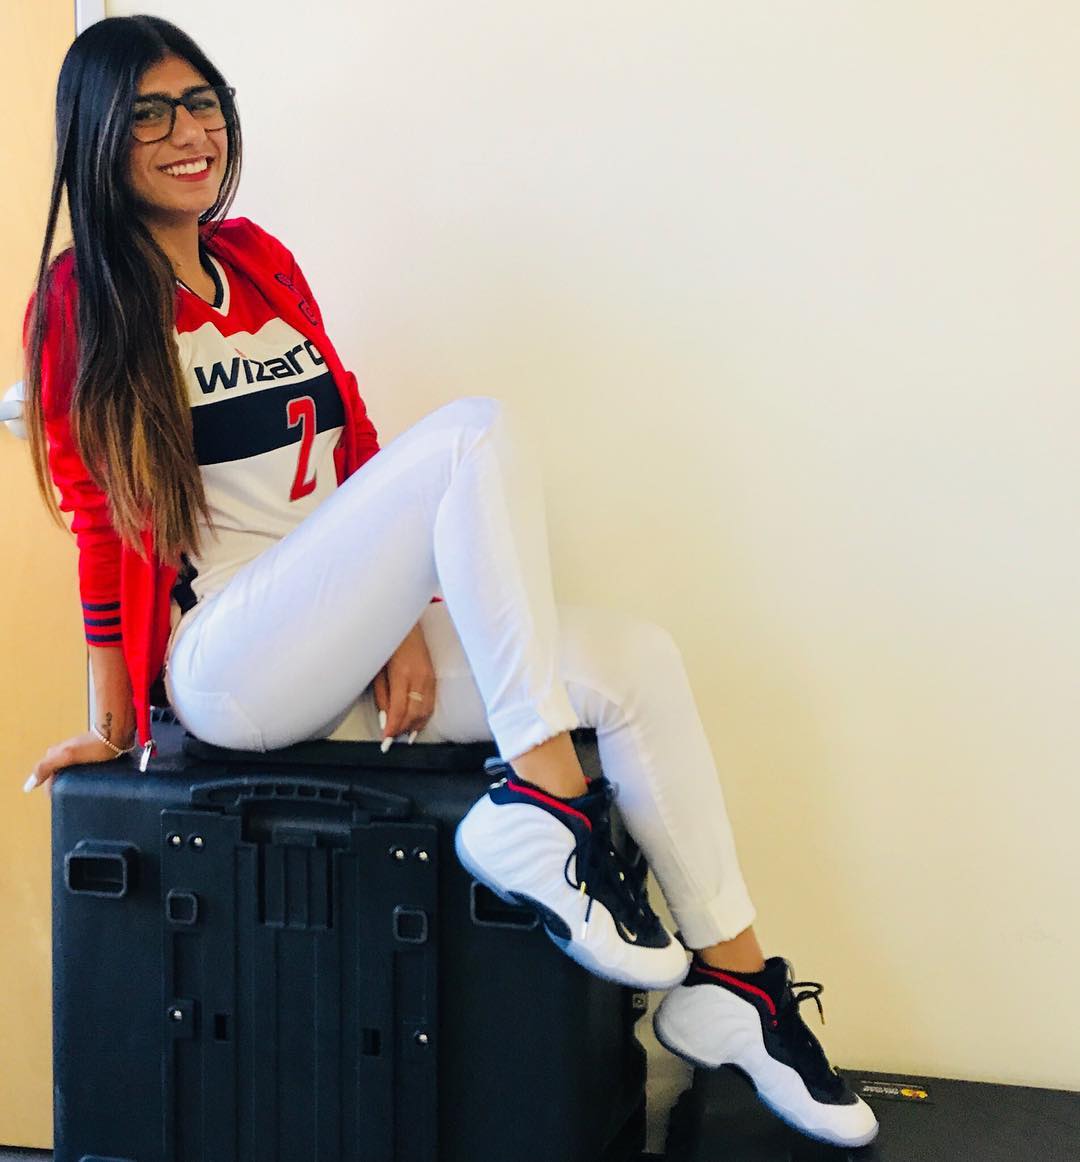 Sports Finance Report: We Talked To Mia Khalifa About Her New Twitch.tv Channel